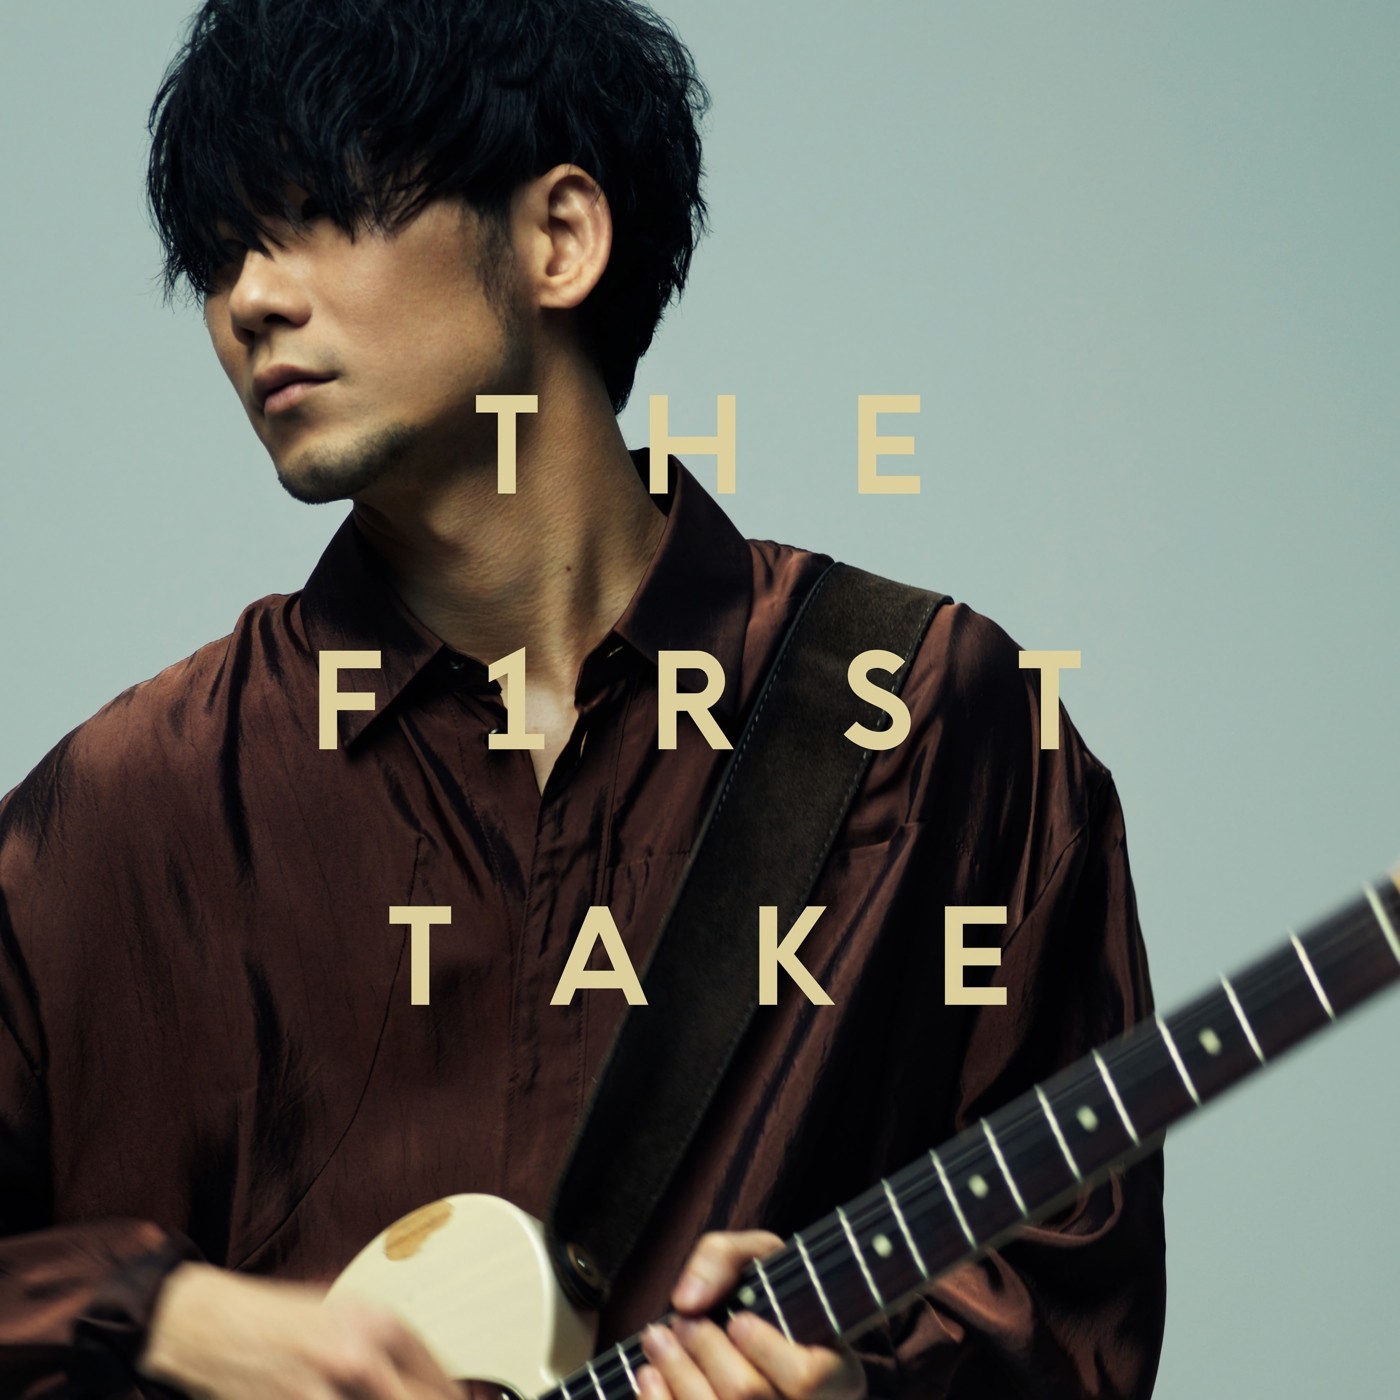 TK from 凛として時雨 – copy light – From THE FIRST TAKE [24bit Lossless + MP3 VBR / WEB] [2020.07.24]